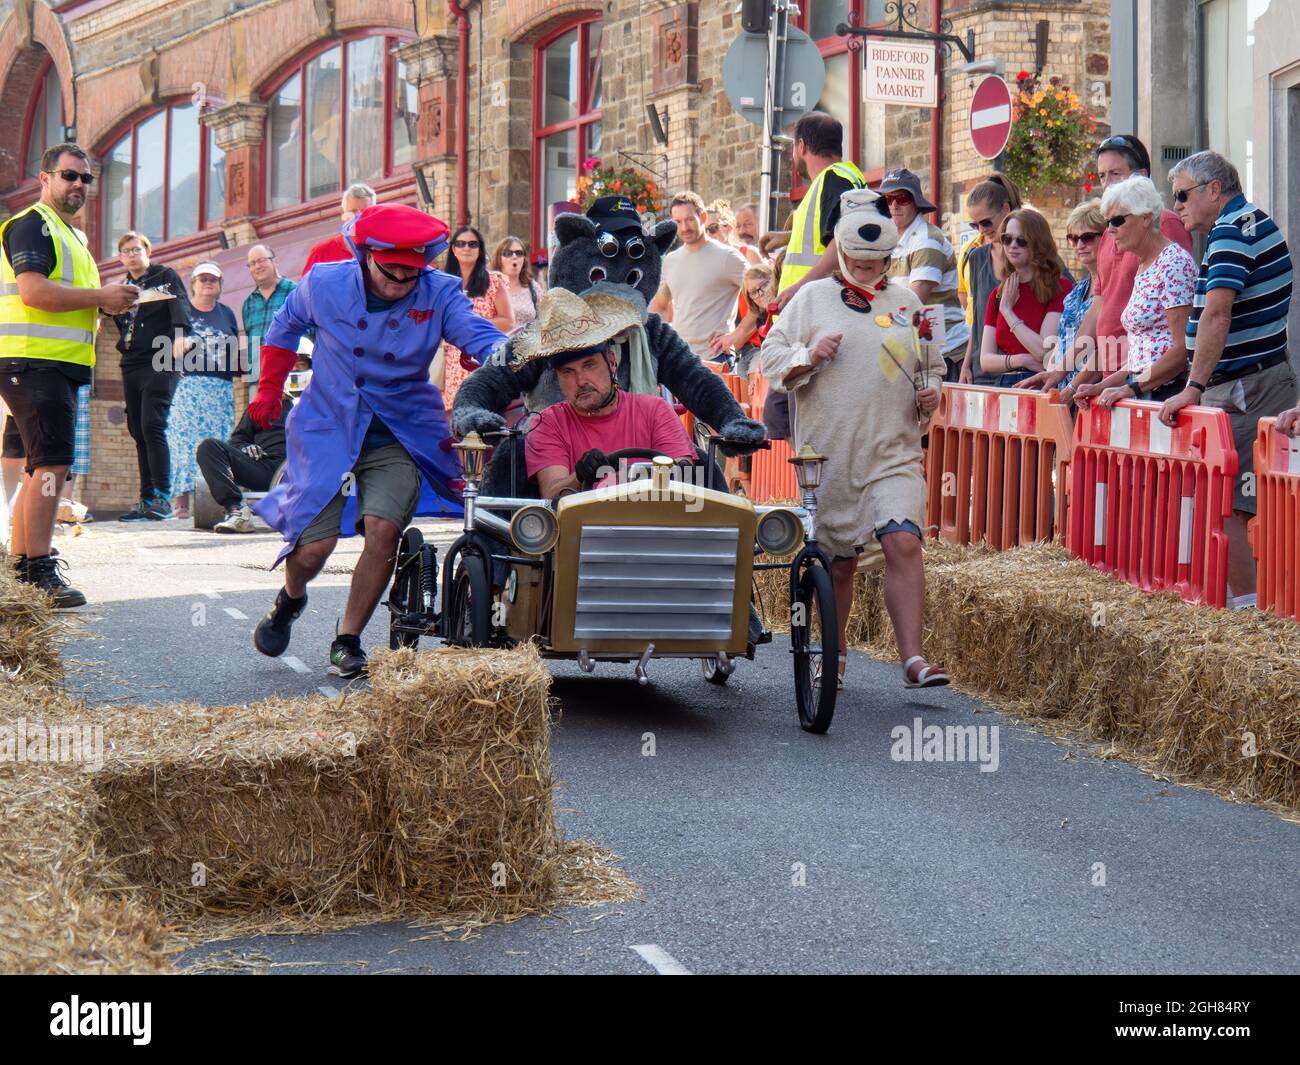 BIDEFORD, NORTH DEVON, ENGLAND - SEPTEMBER 5 2021: The Soapbox Derby - and we're off! Team and cart dressed as wacky races leave the starting line. Stock Photo